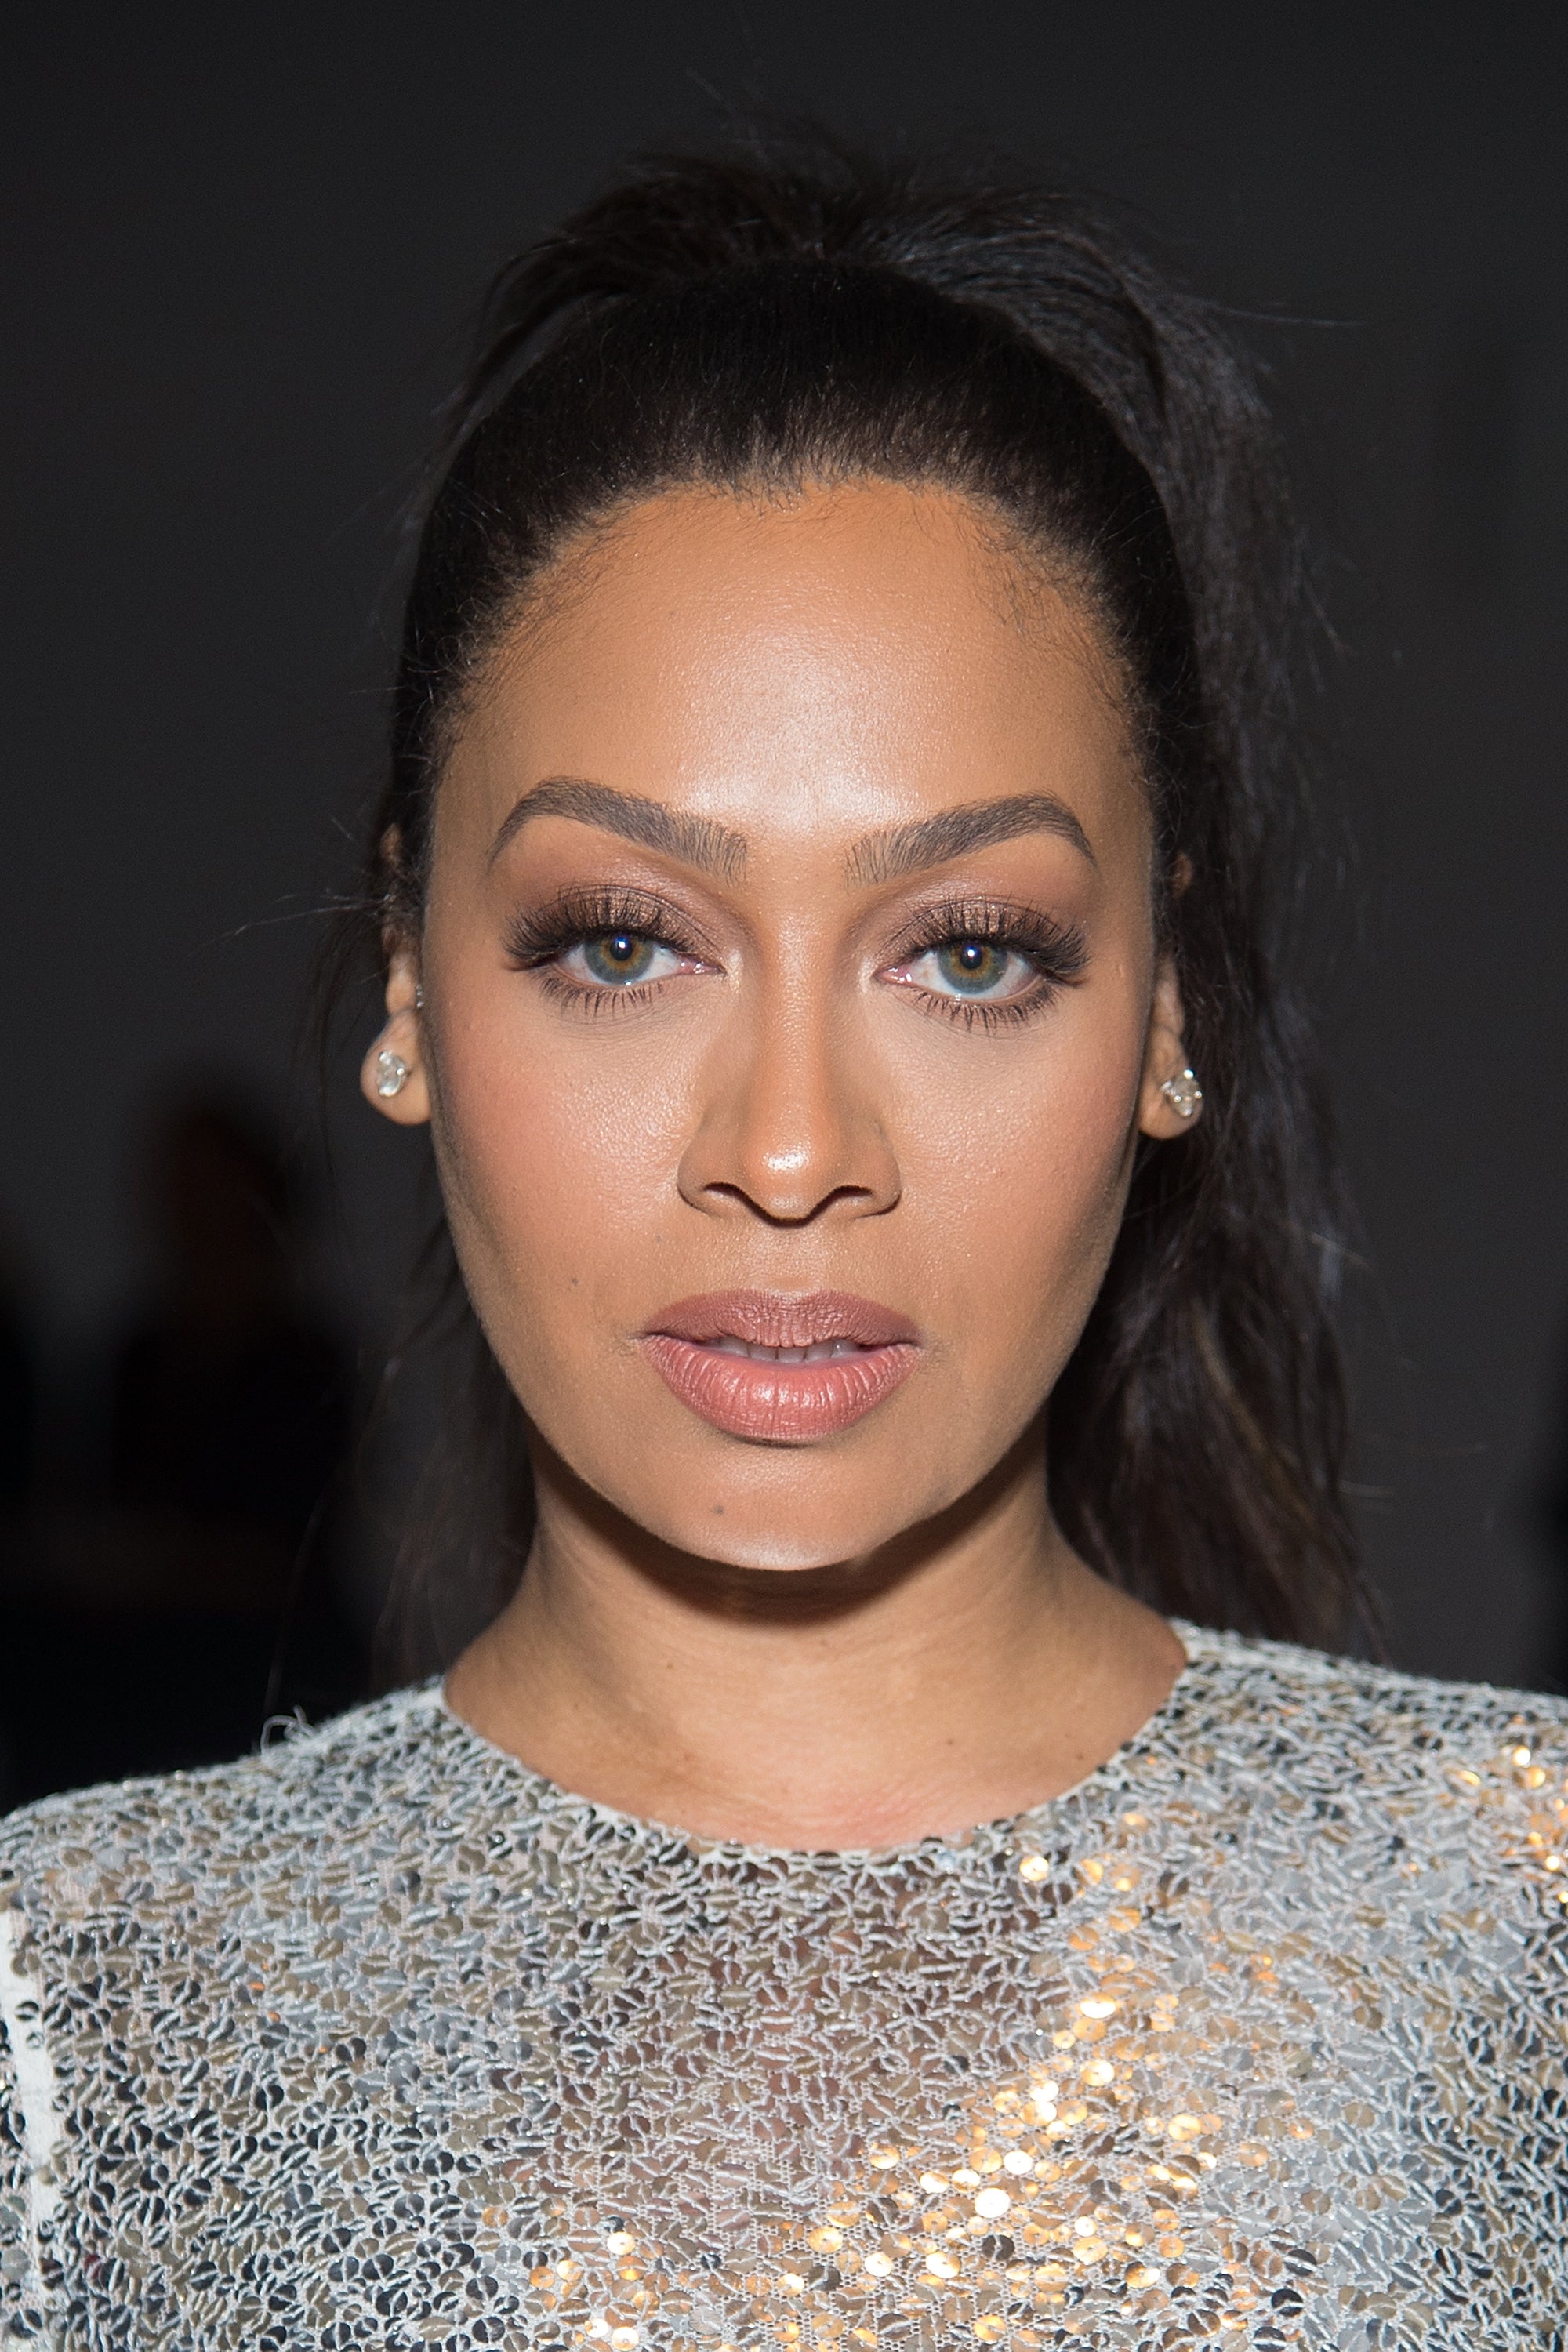 21 Celebrities Who Give Us Serious Eyebrow Envy